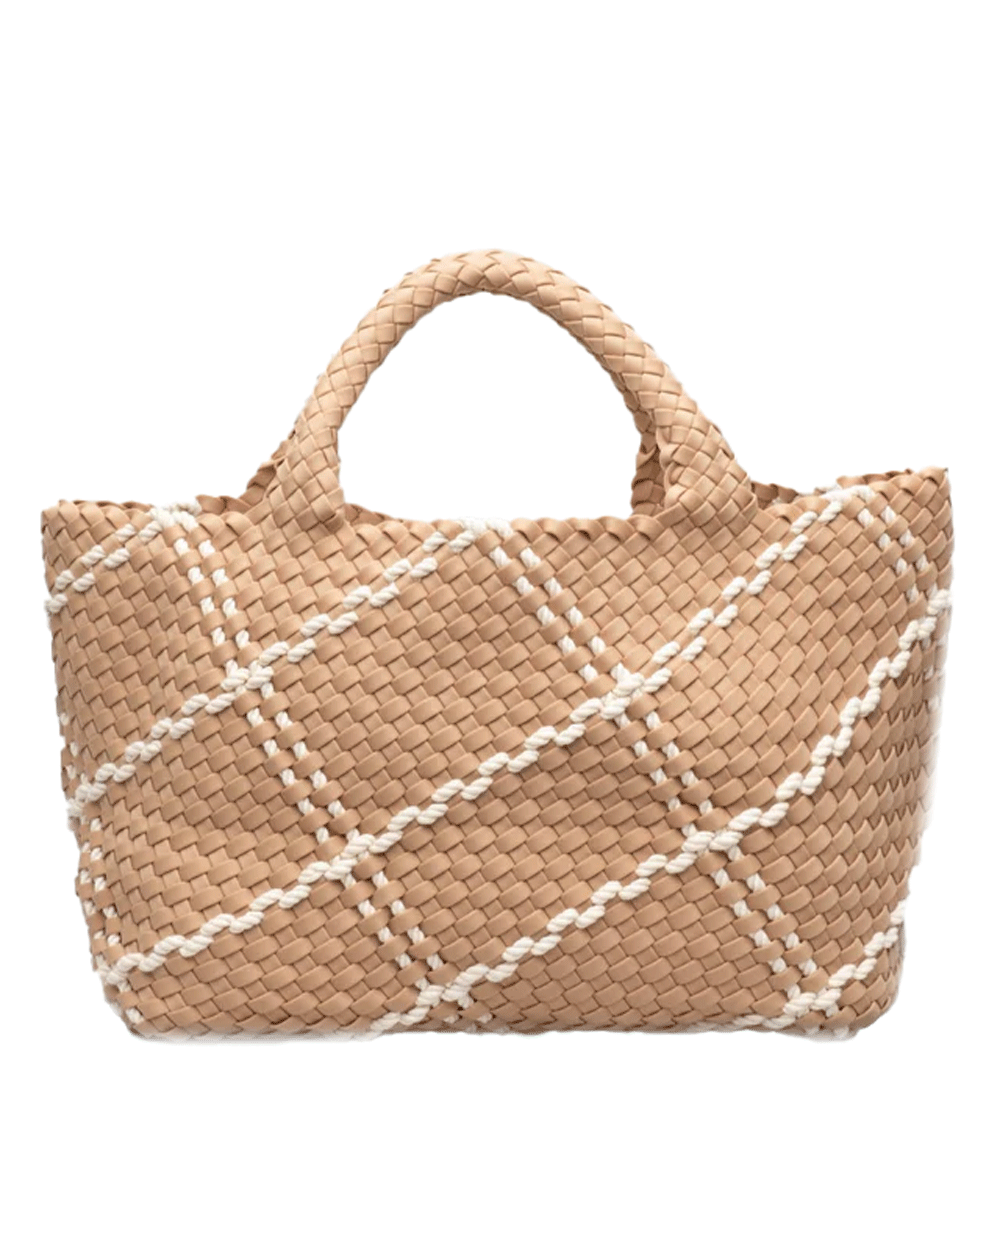 St. Barths Medium Tote In Rope Camel